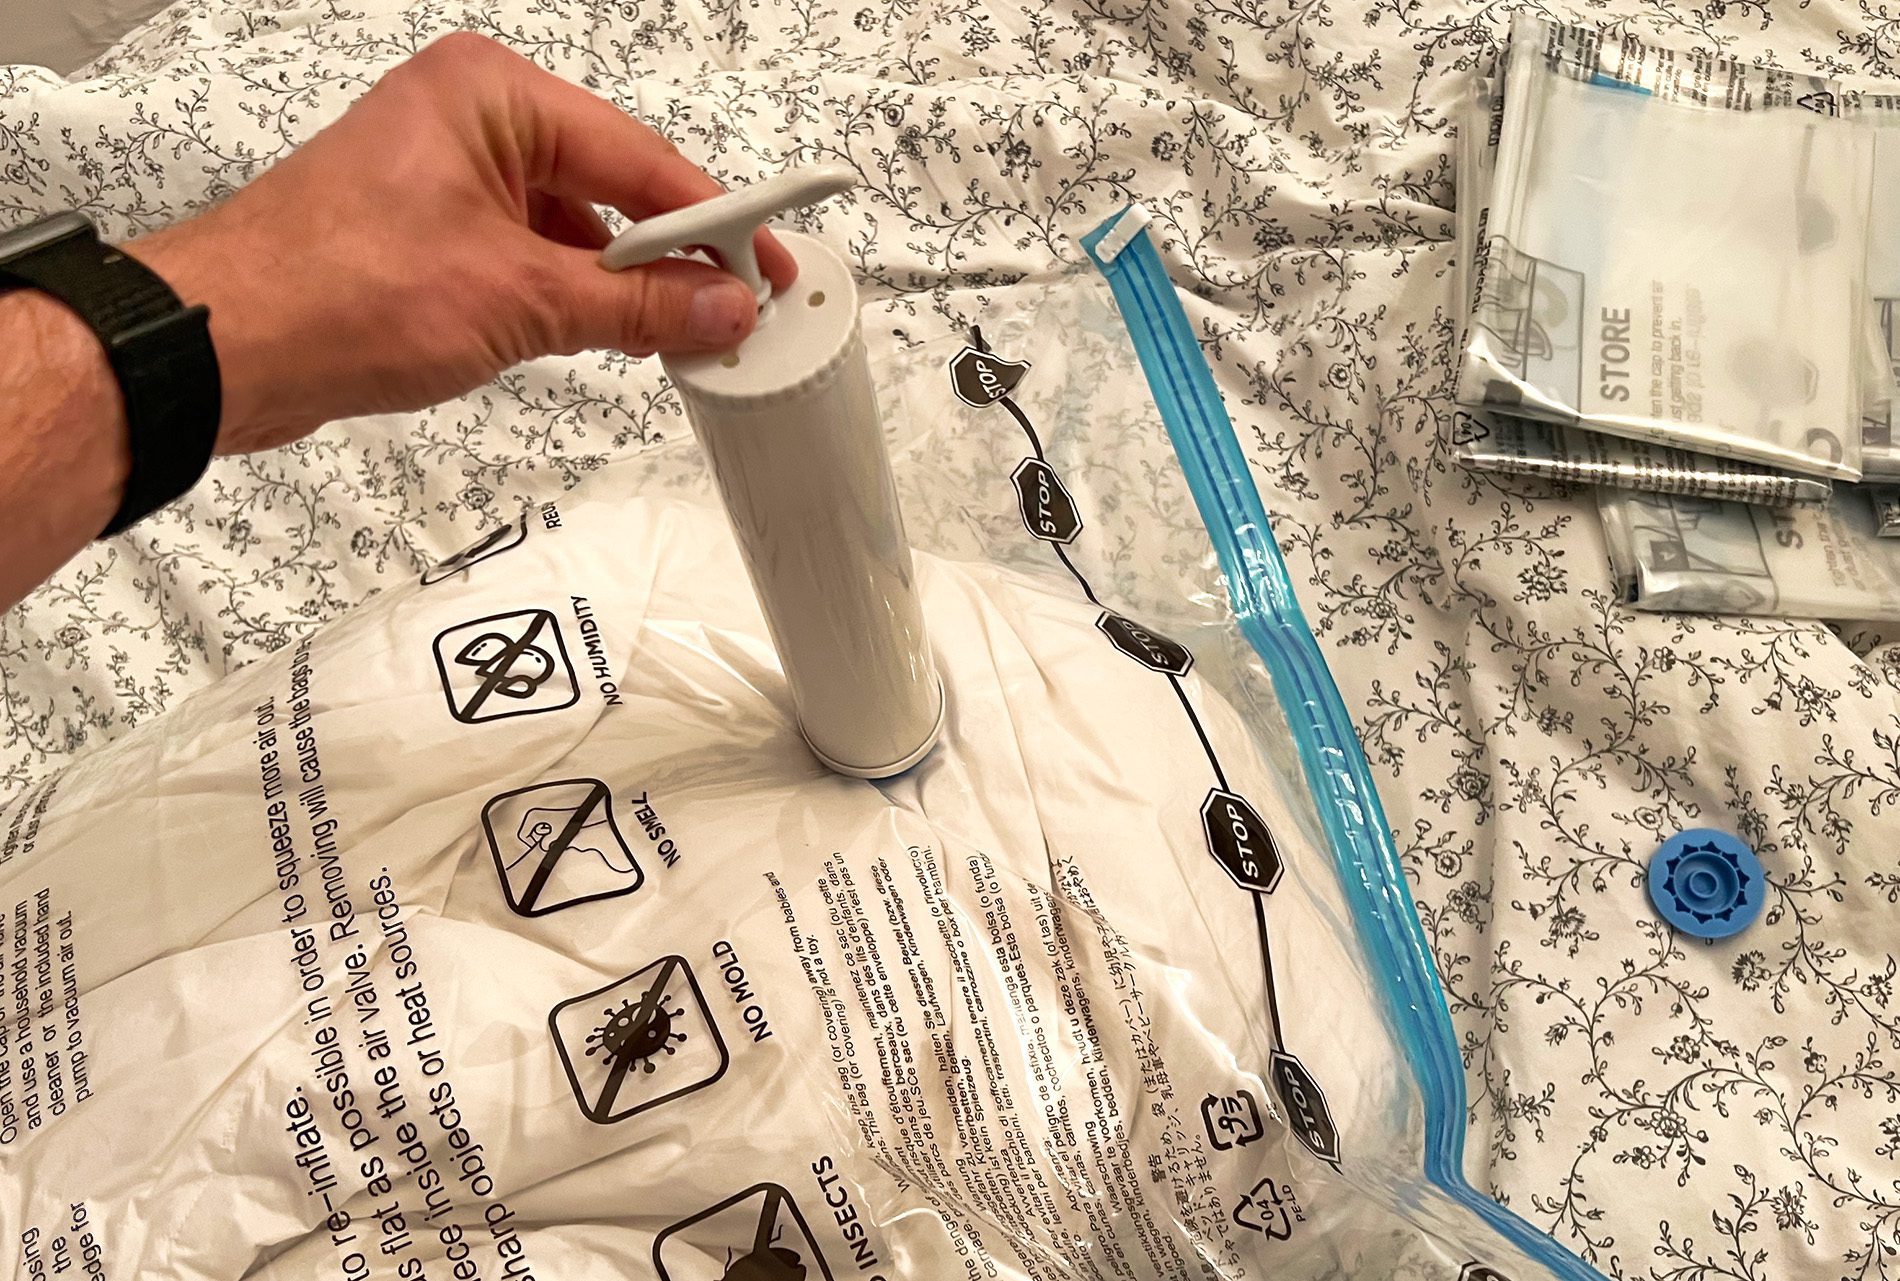 The supplied pump is built very cheaply, but that's totally ok, because it does its job and if it does break, every set of vacuum bags comes with a new one.